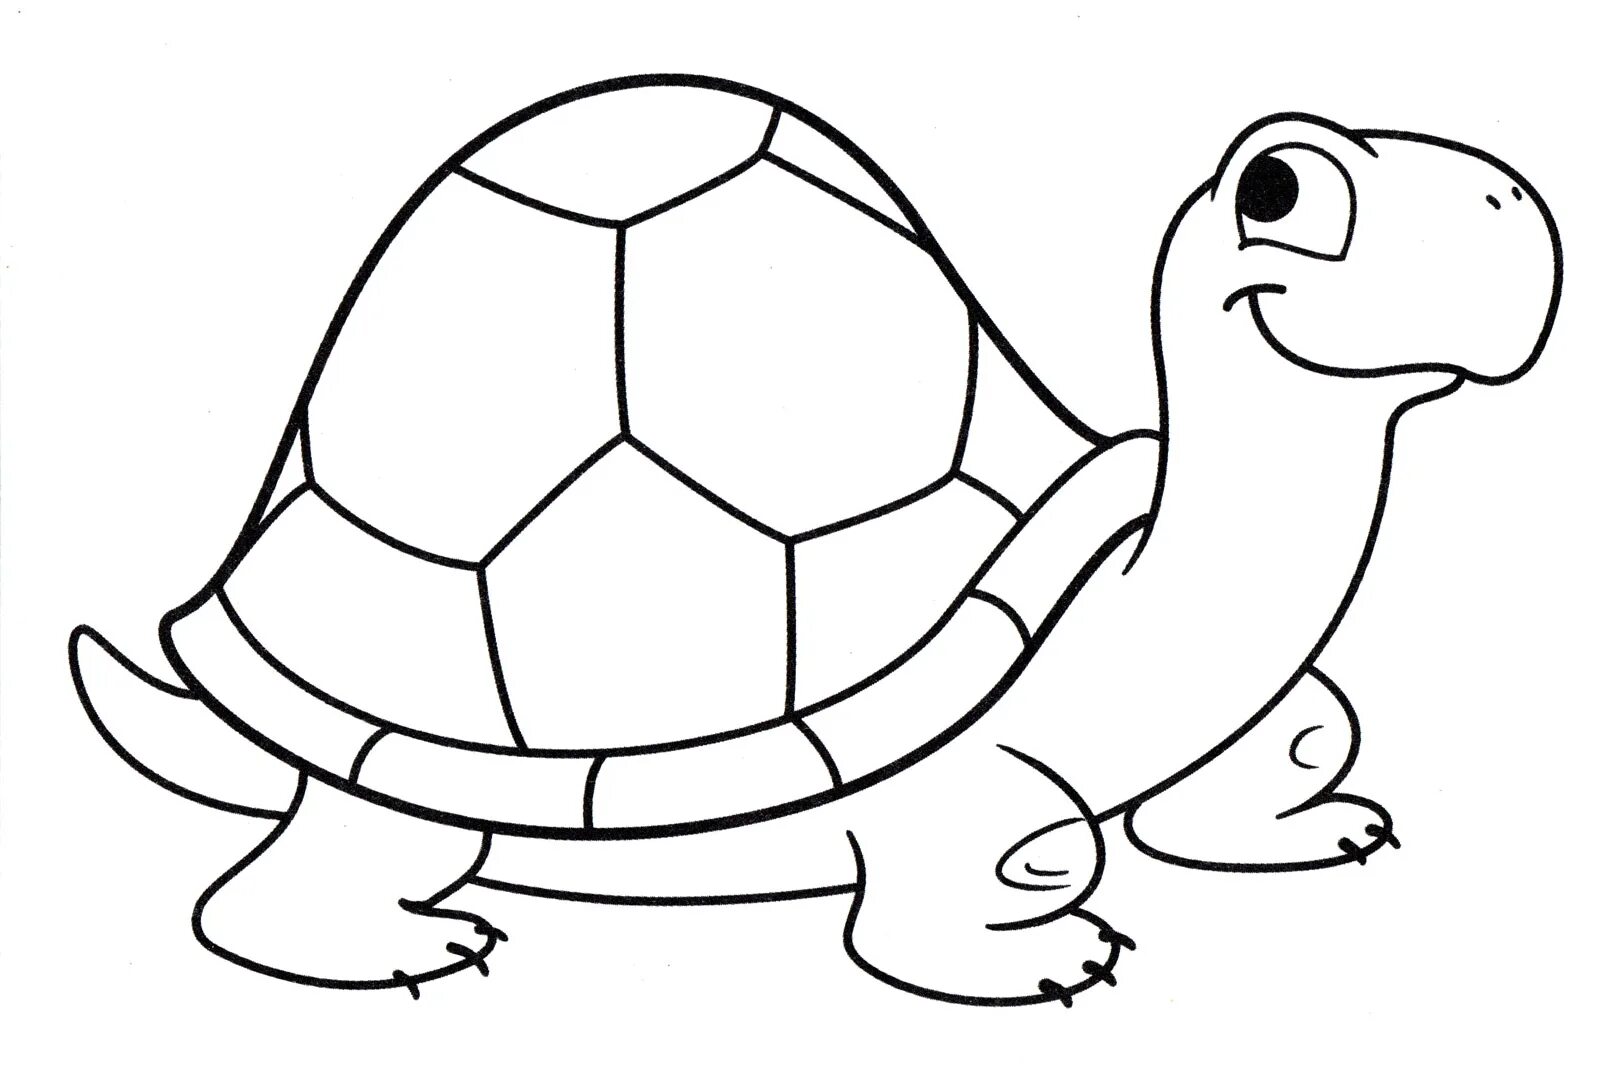 Colorful bright turtle coloring book for children